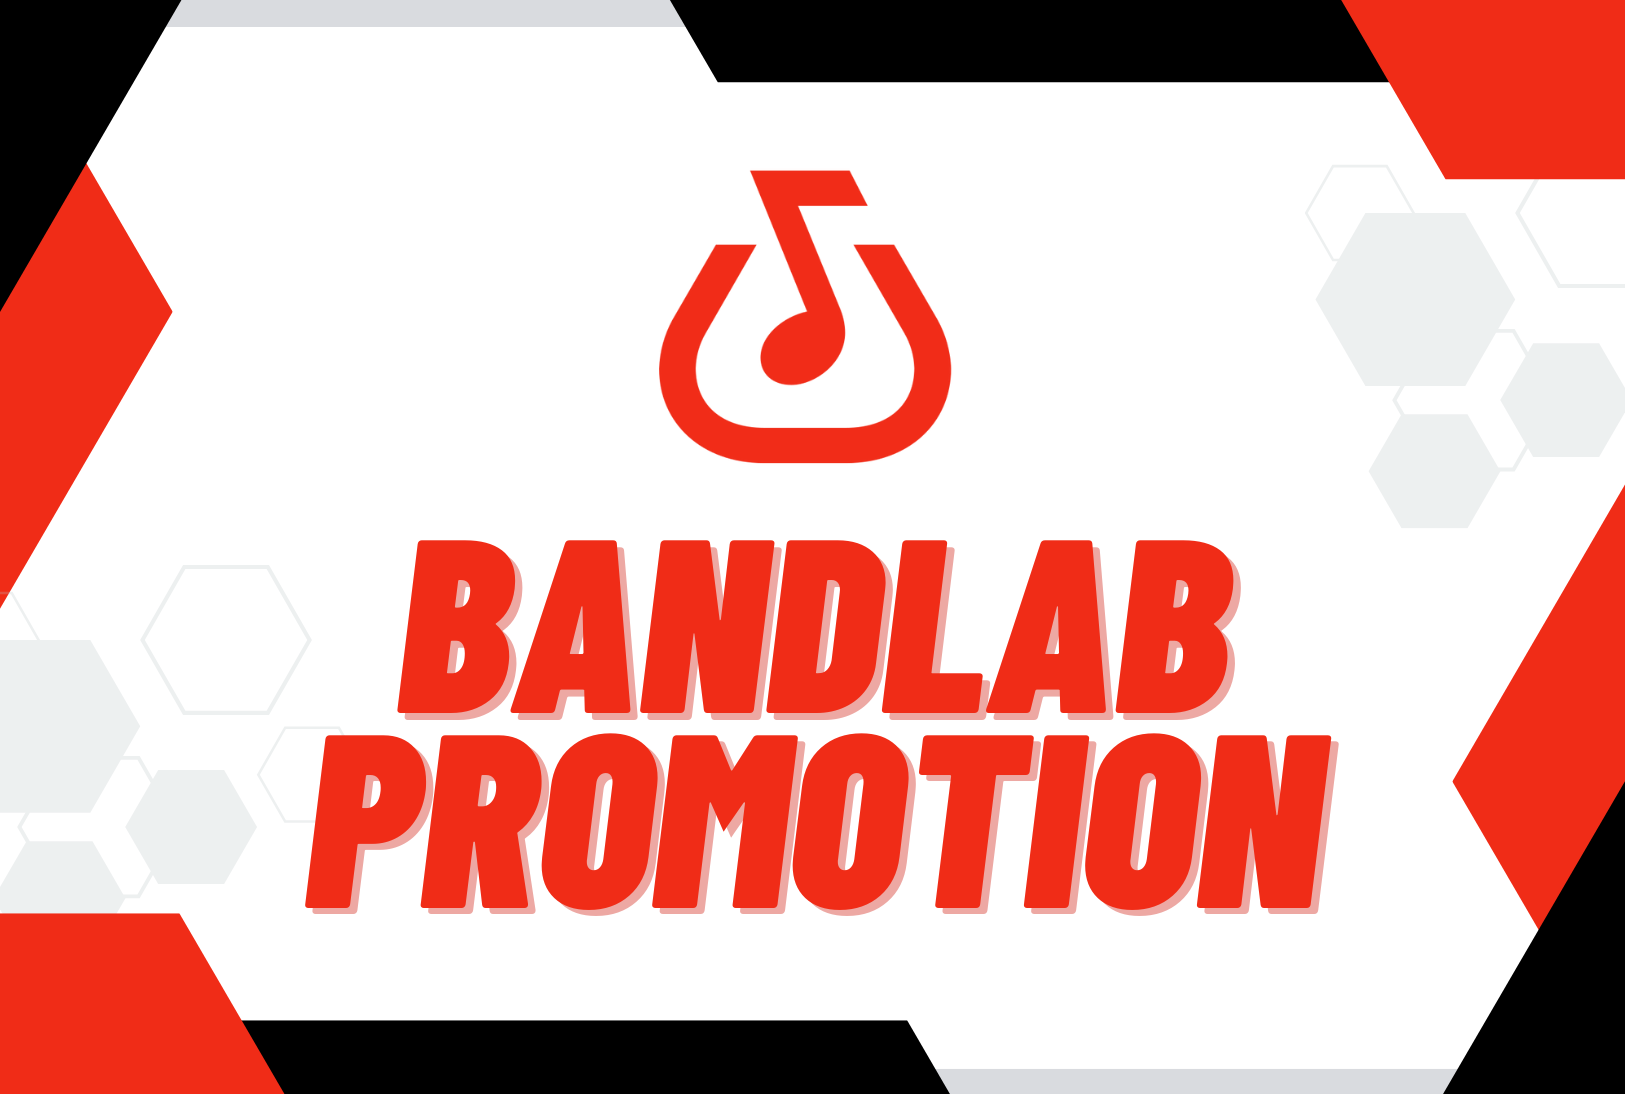 ⭐ 1000 BANDLAB PROMOTION AND BOOST 📣 ORGANIC BANDLAB MUSIC VIDEO PROMOTION TO BOOST 🚀 YOUR CHANNEL GROWTH 📈 AND ENGAGEMENT